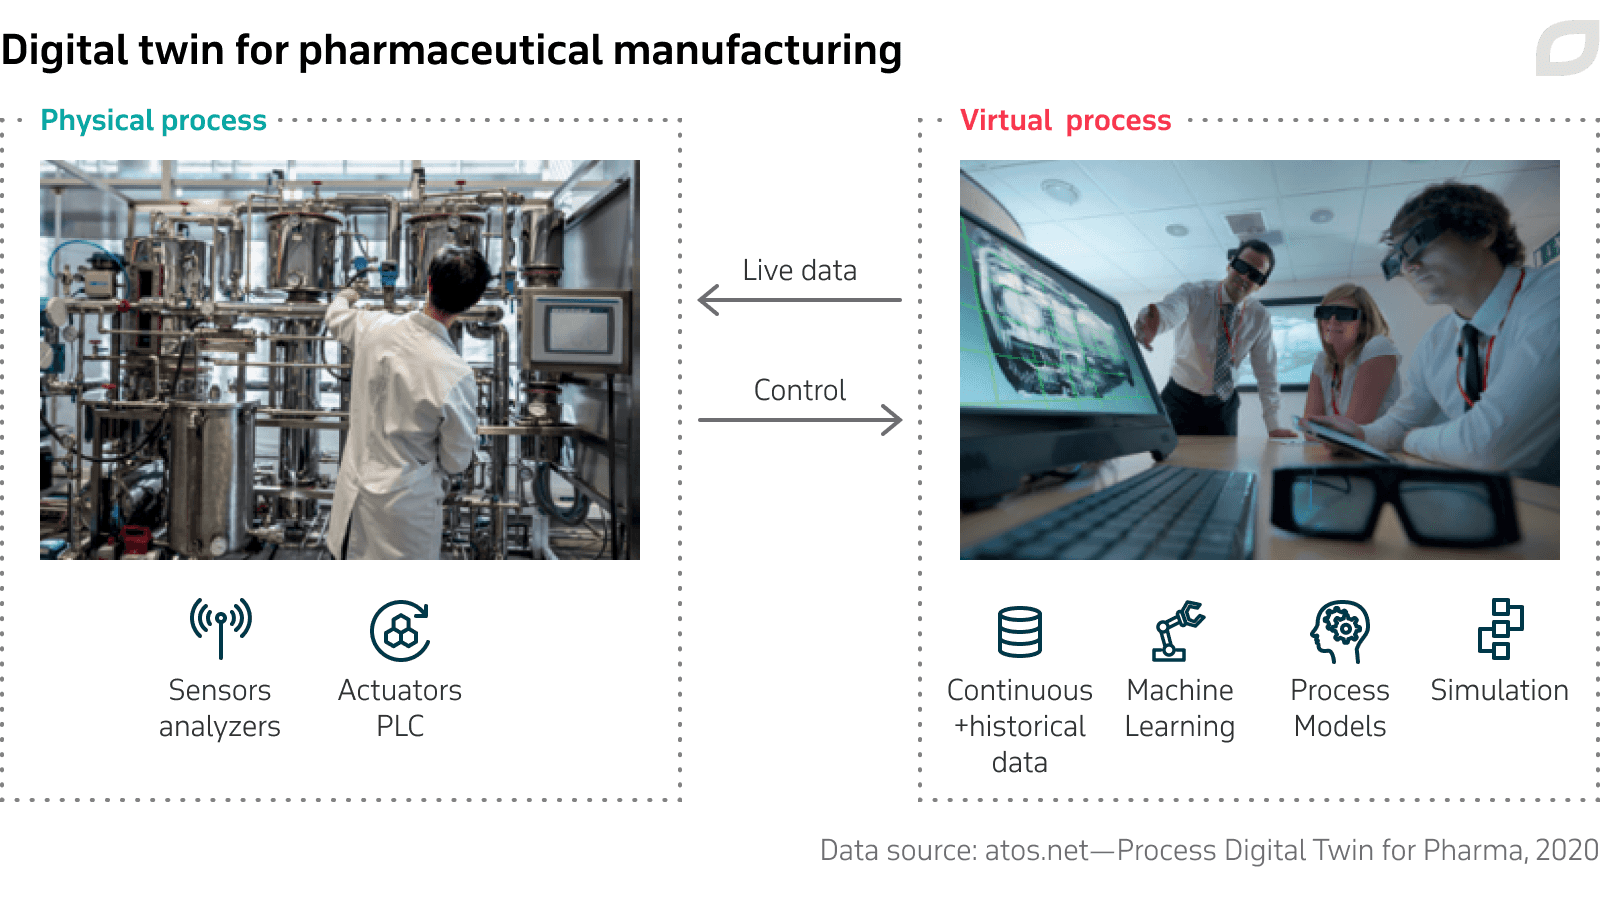 Digital twin for pharmaceutical manufacturing